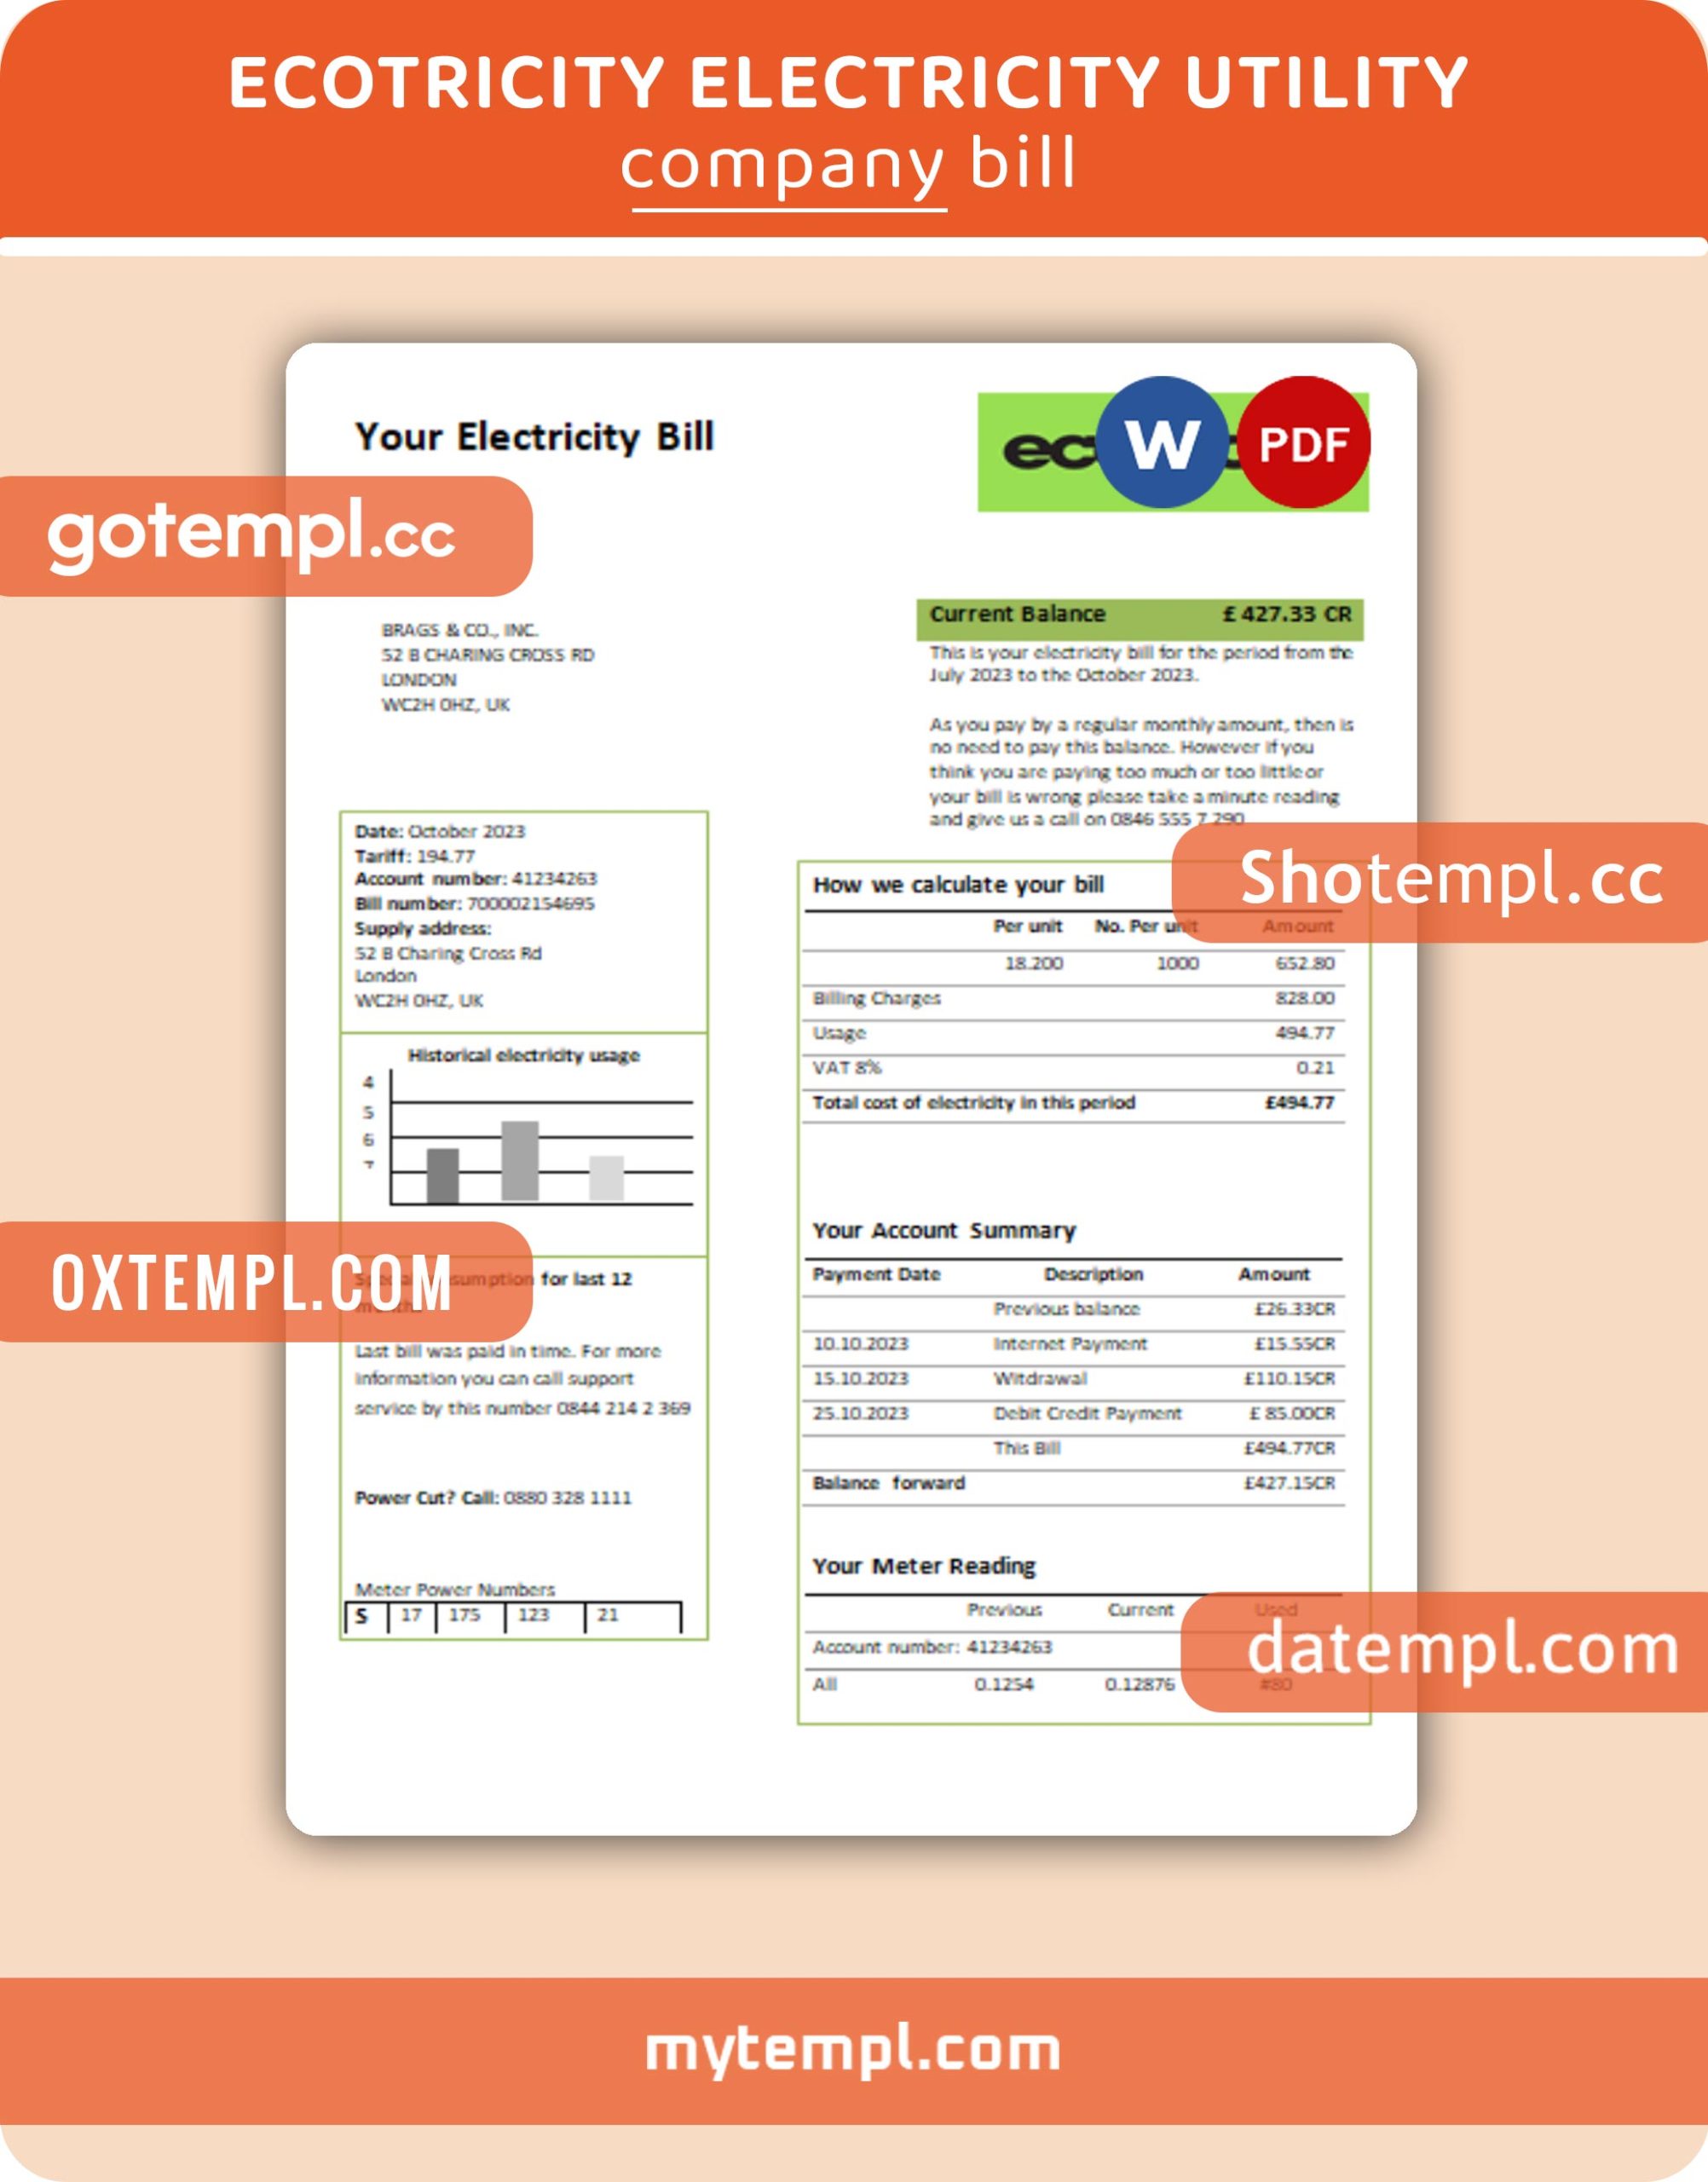 SP Group business utility bill, Word and PDF template